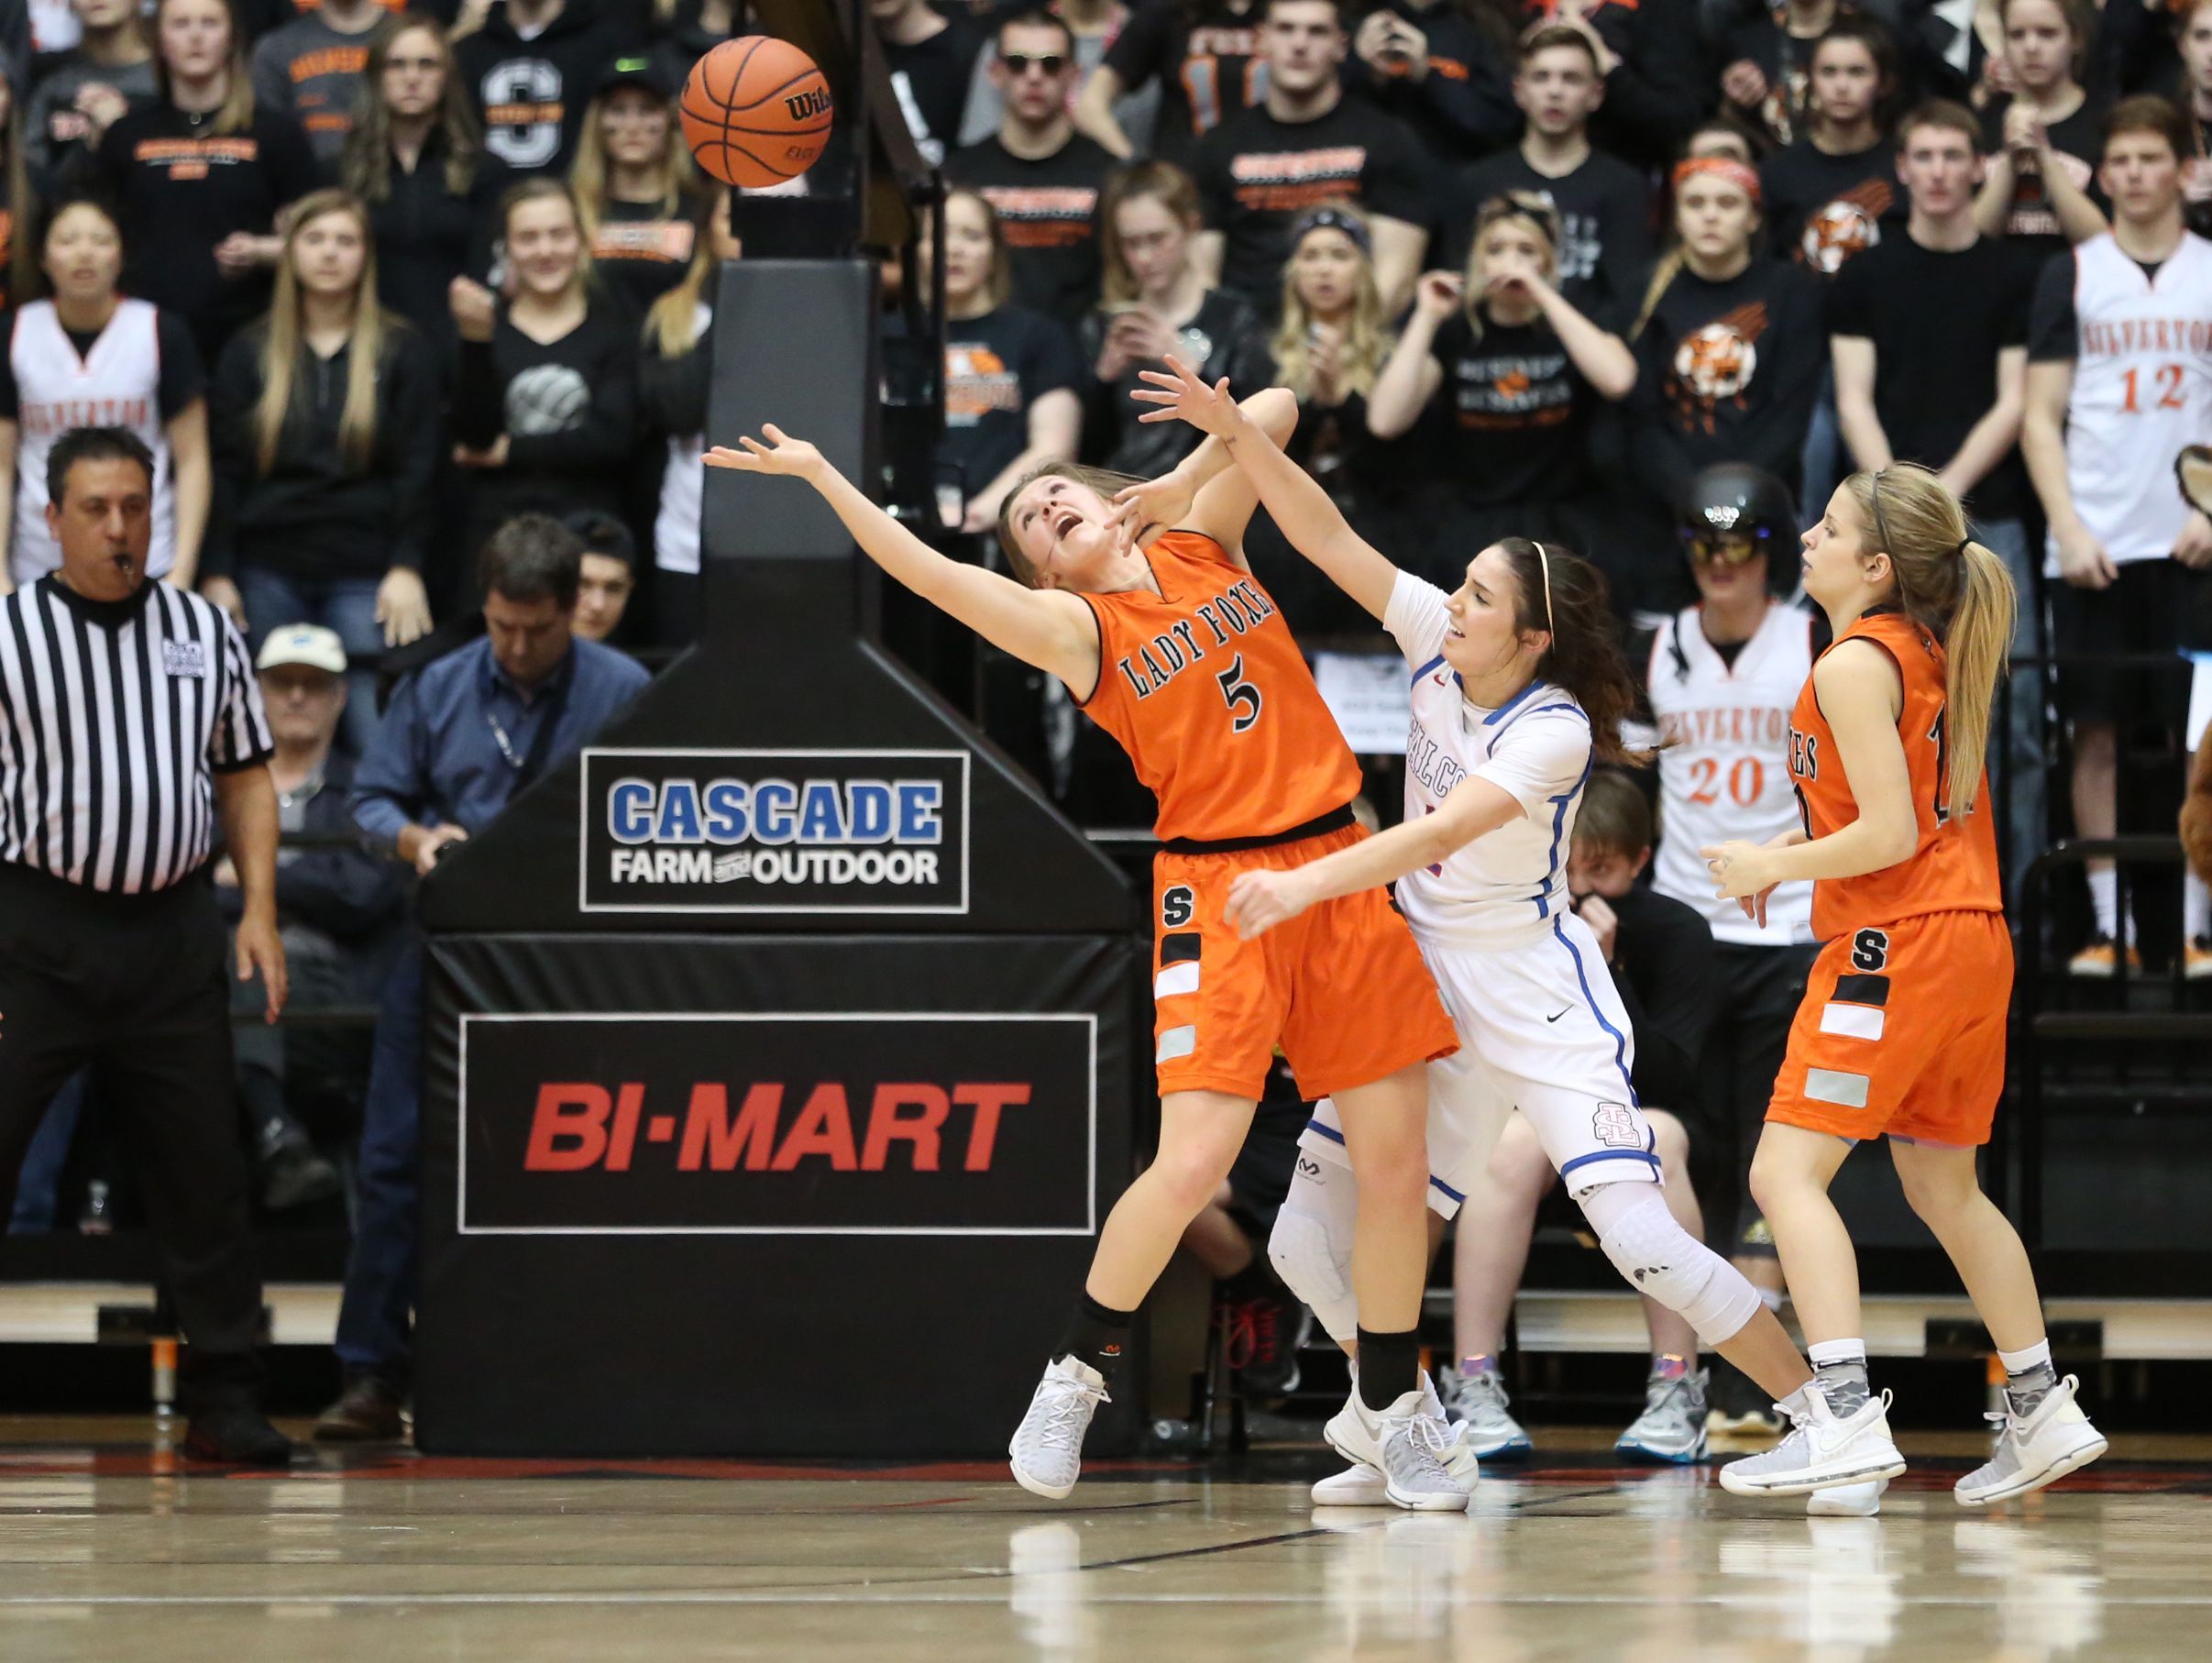 Silverton's Kayce McLaughlin and the Foxes fall to La Salle 42-28 in the OSAA Class 5A state championship on Friday, March 10, 2017, at Gill Coliseum in Corvallis.